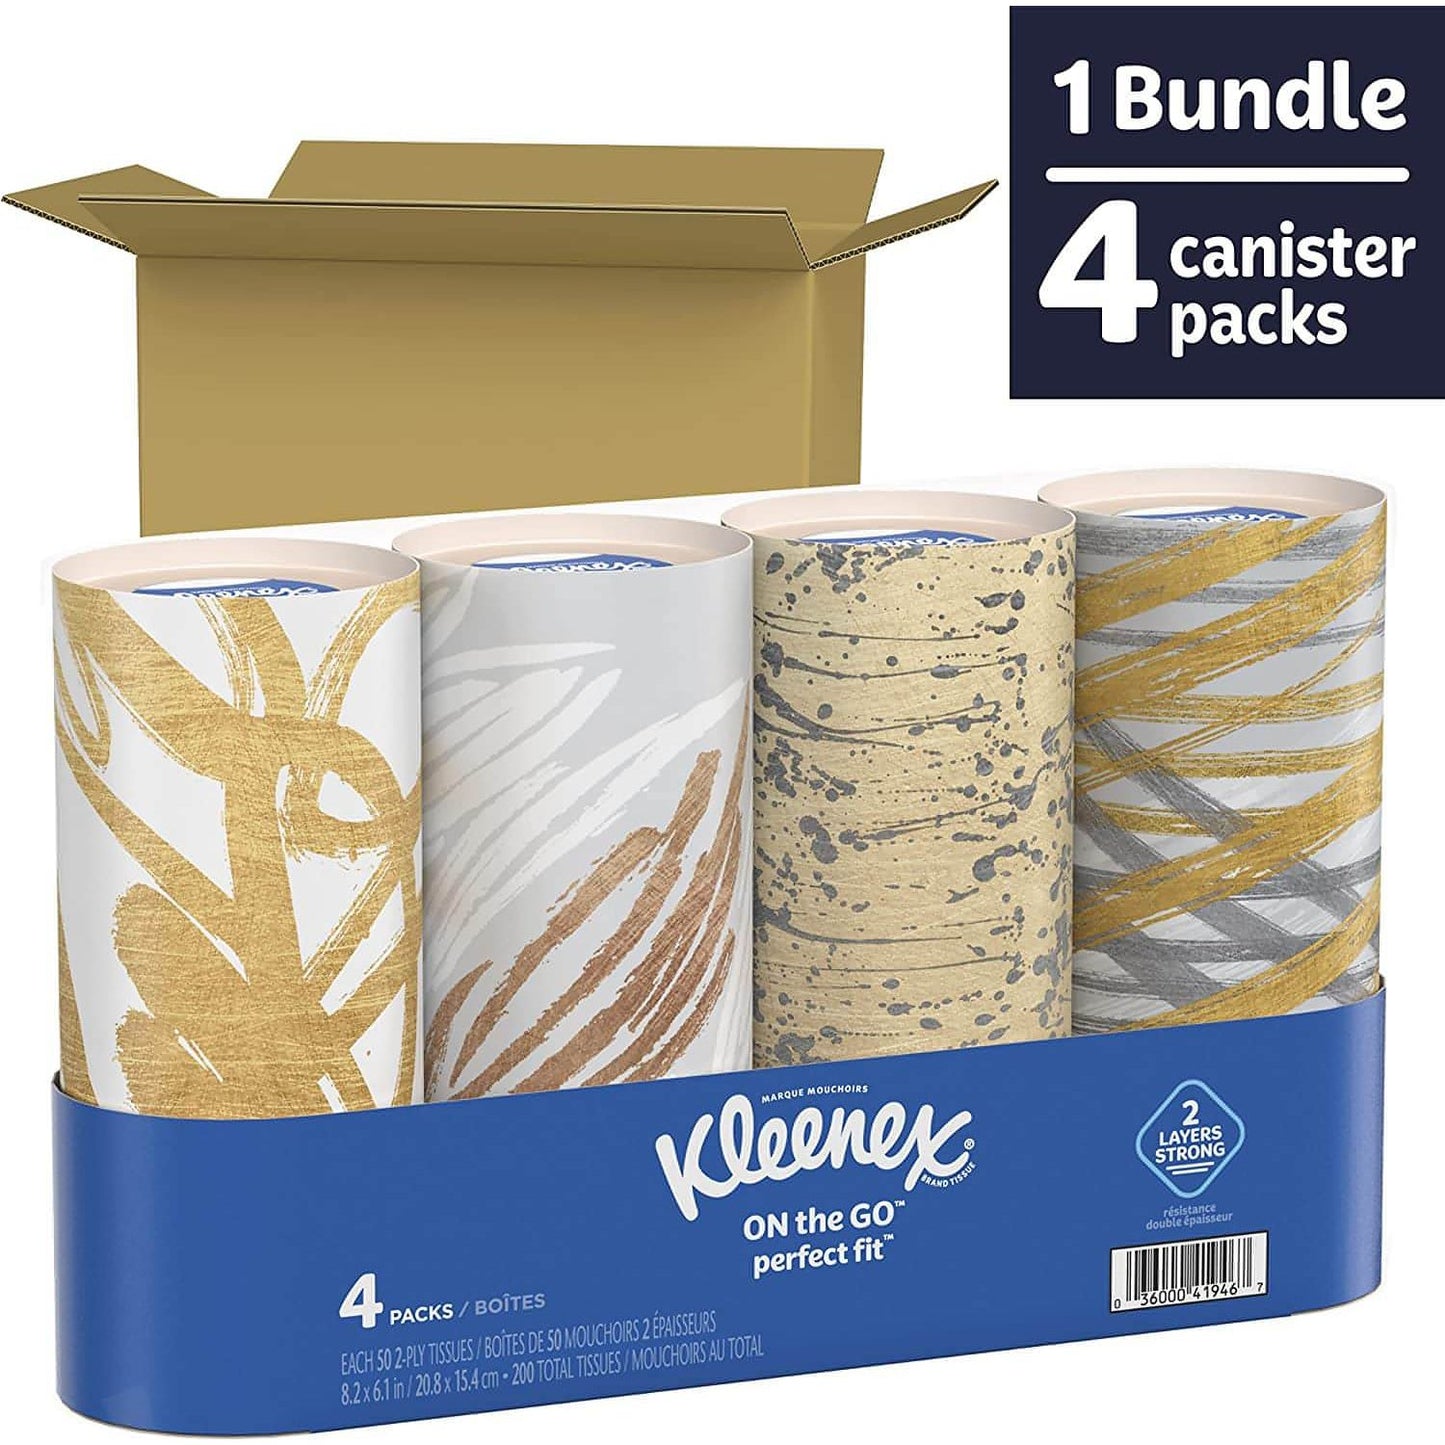 Kleenex Perfect Fit Facial Tissues, Car Tissues, 50 Tissues per Canister - Brandat Outlet